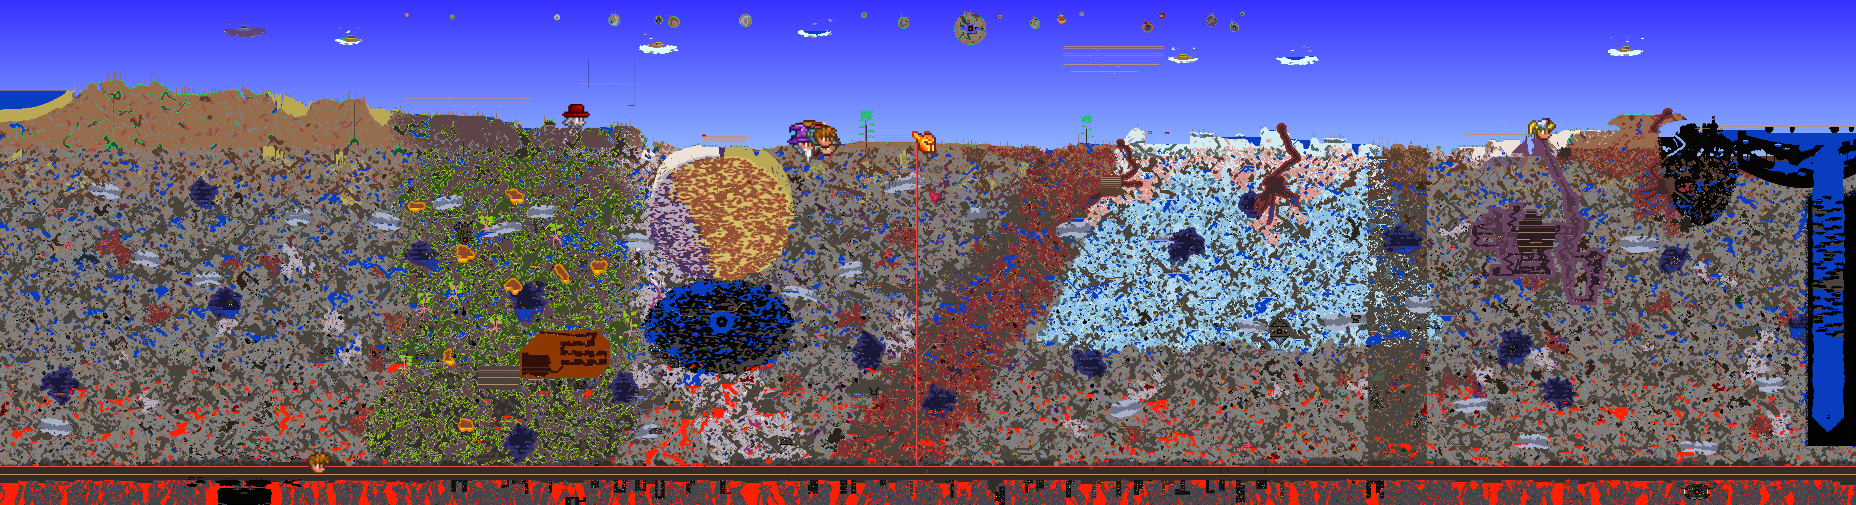 Terraria_ There is No Cow Layer 11_12_2020 2_37_37 PM (2).png